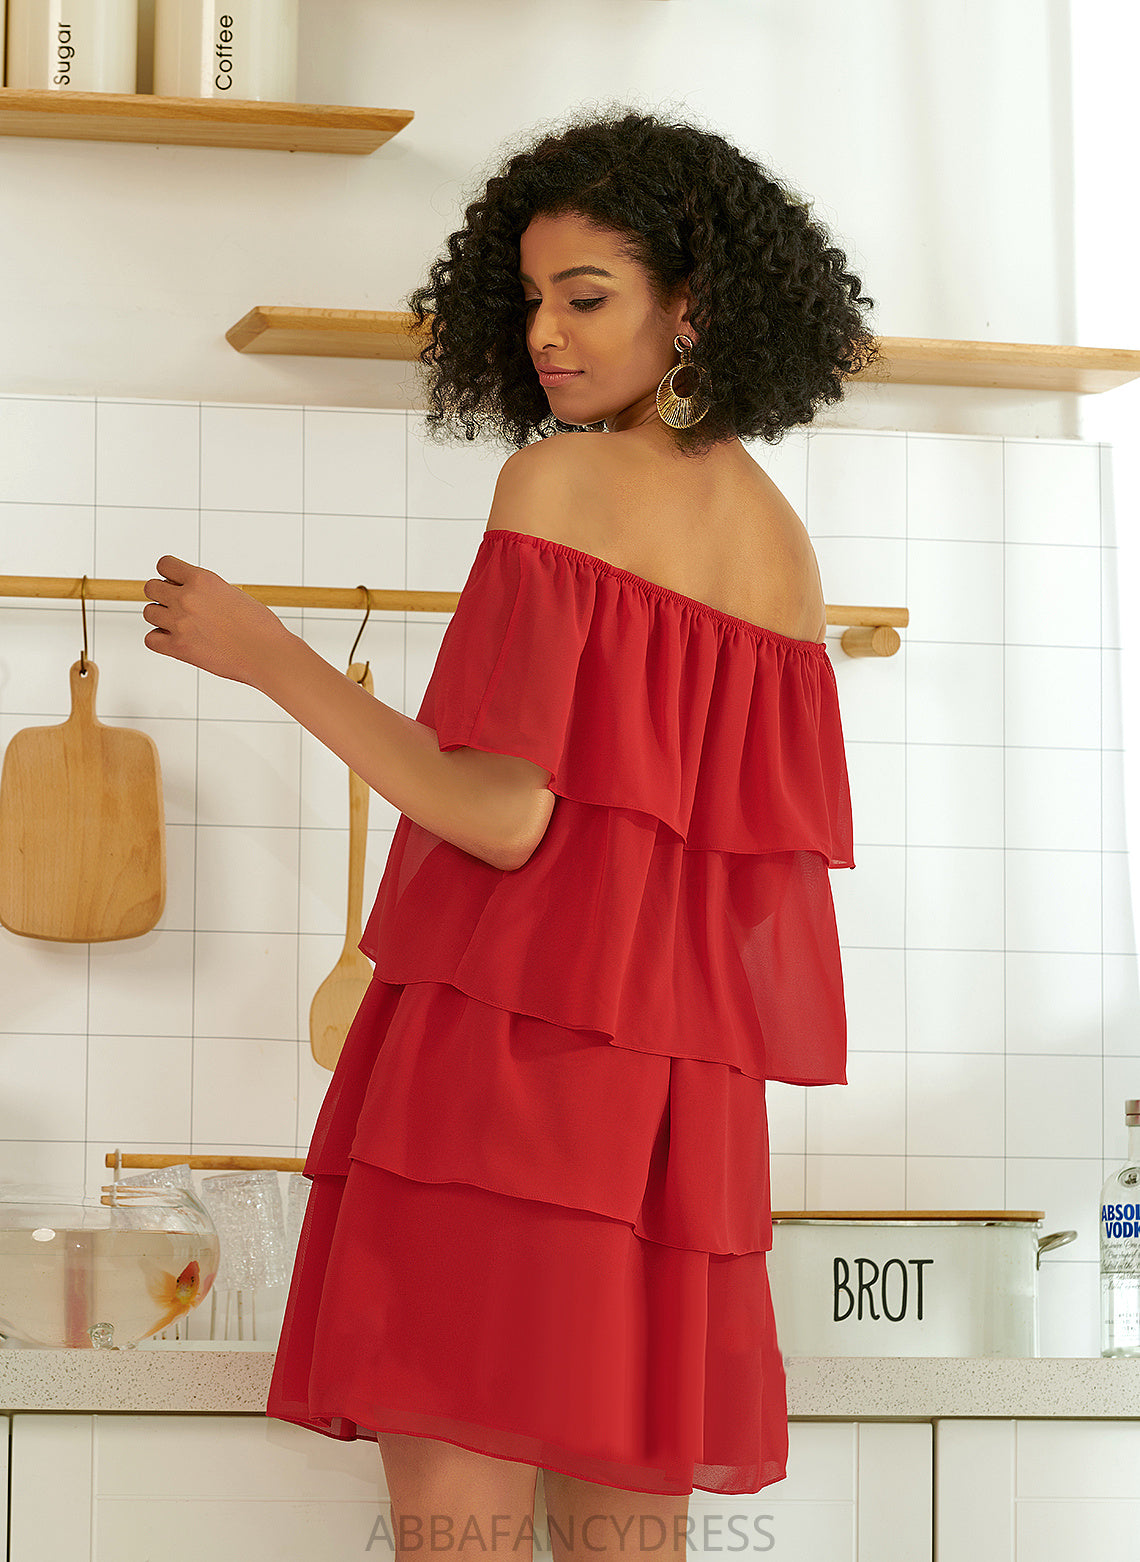 Dress With Cocktail Janessa Short/Mini Off-the-Shoulder Cocktail Dresses Chiffon Ruffle